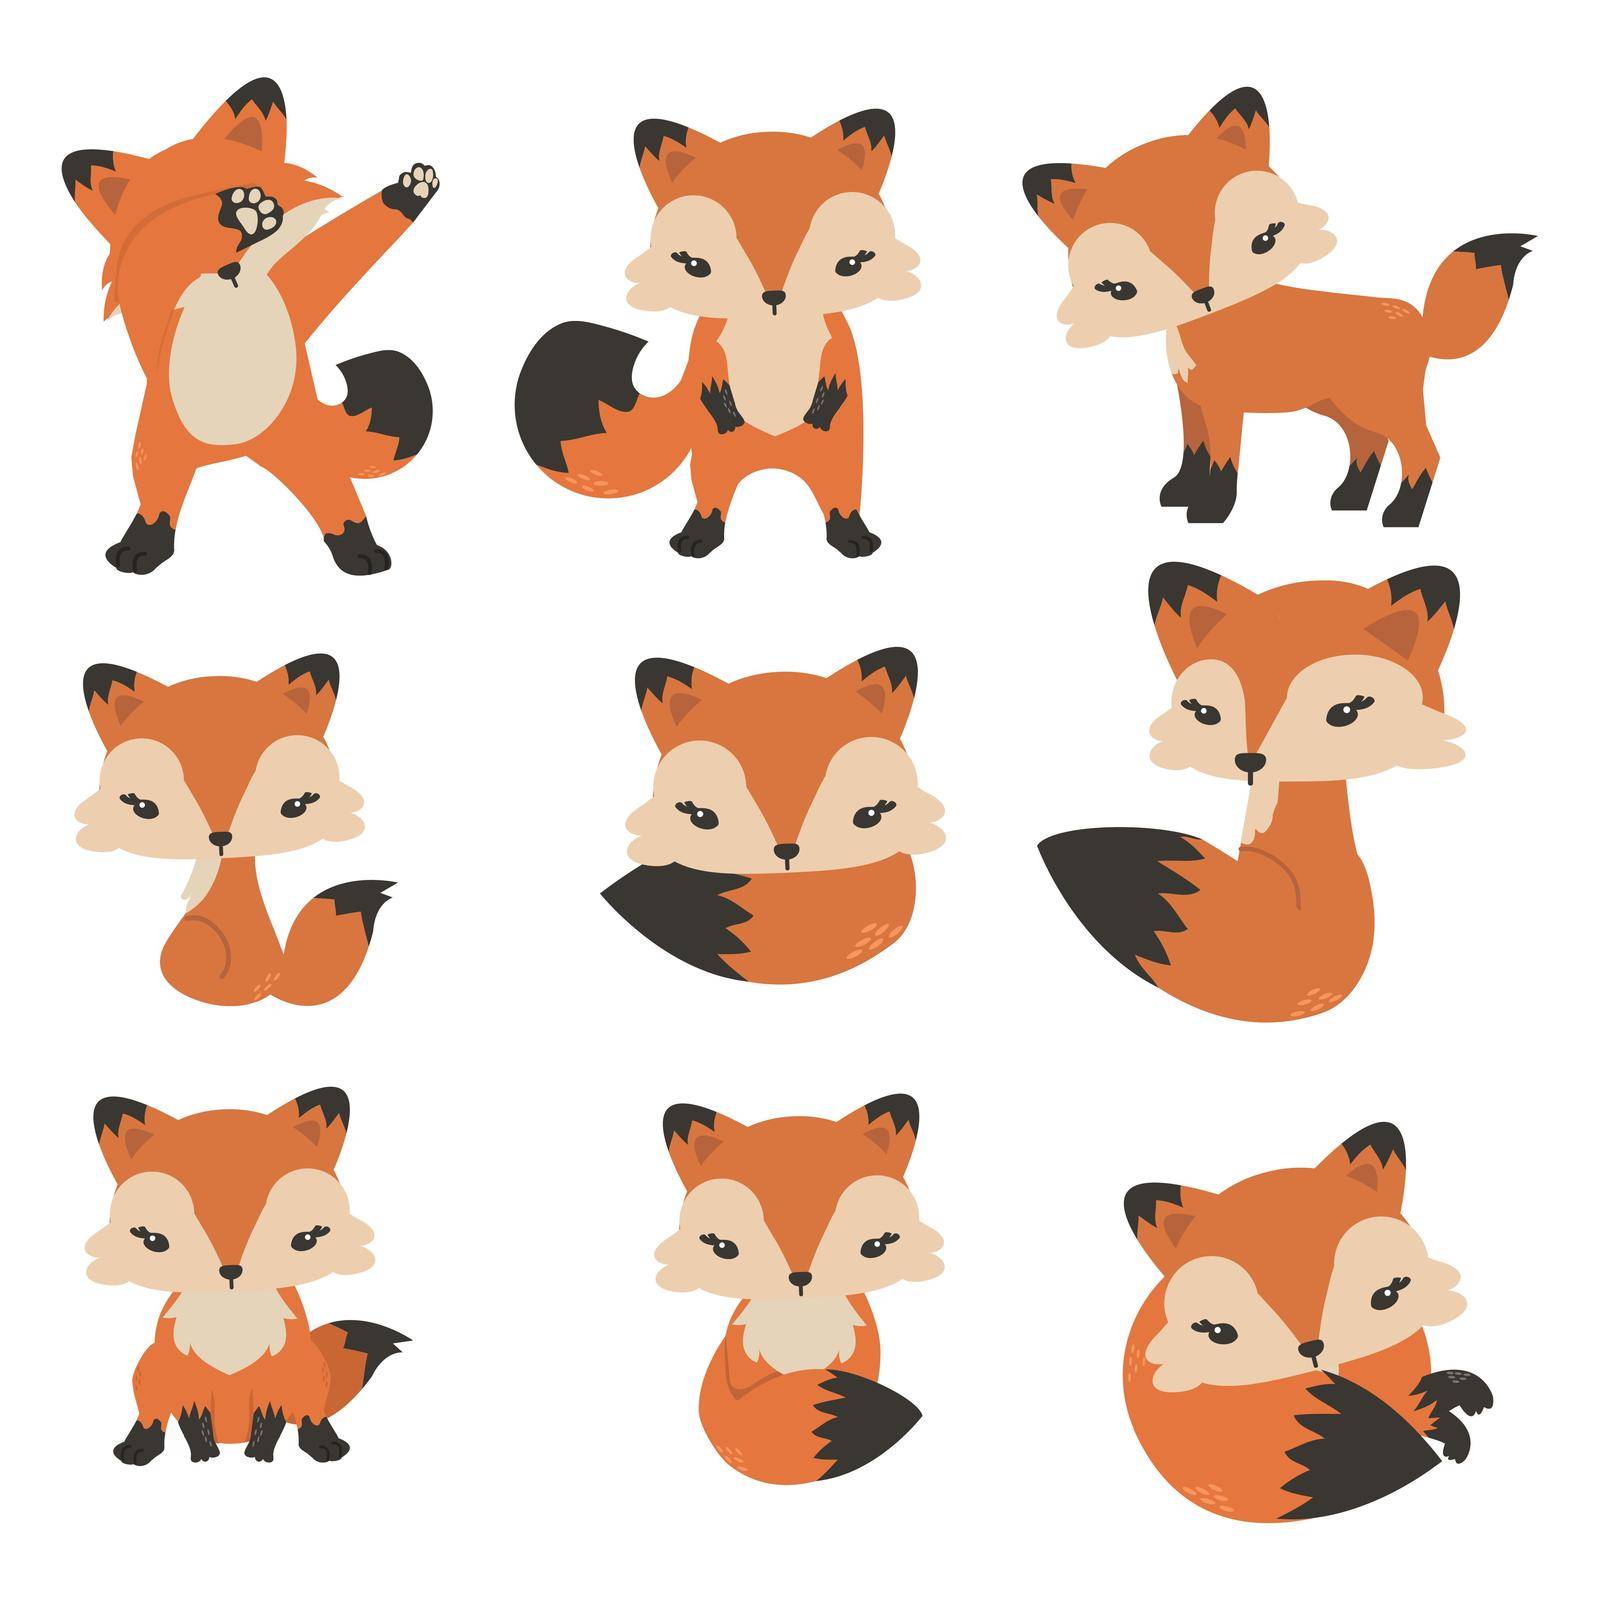 Cute foxes cartoon in different poses collection by focus_bell